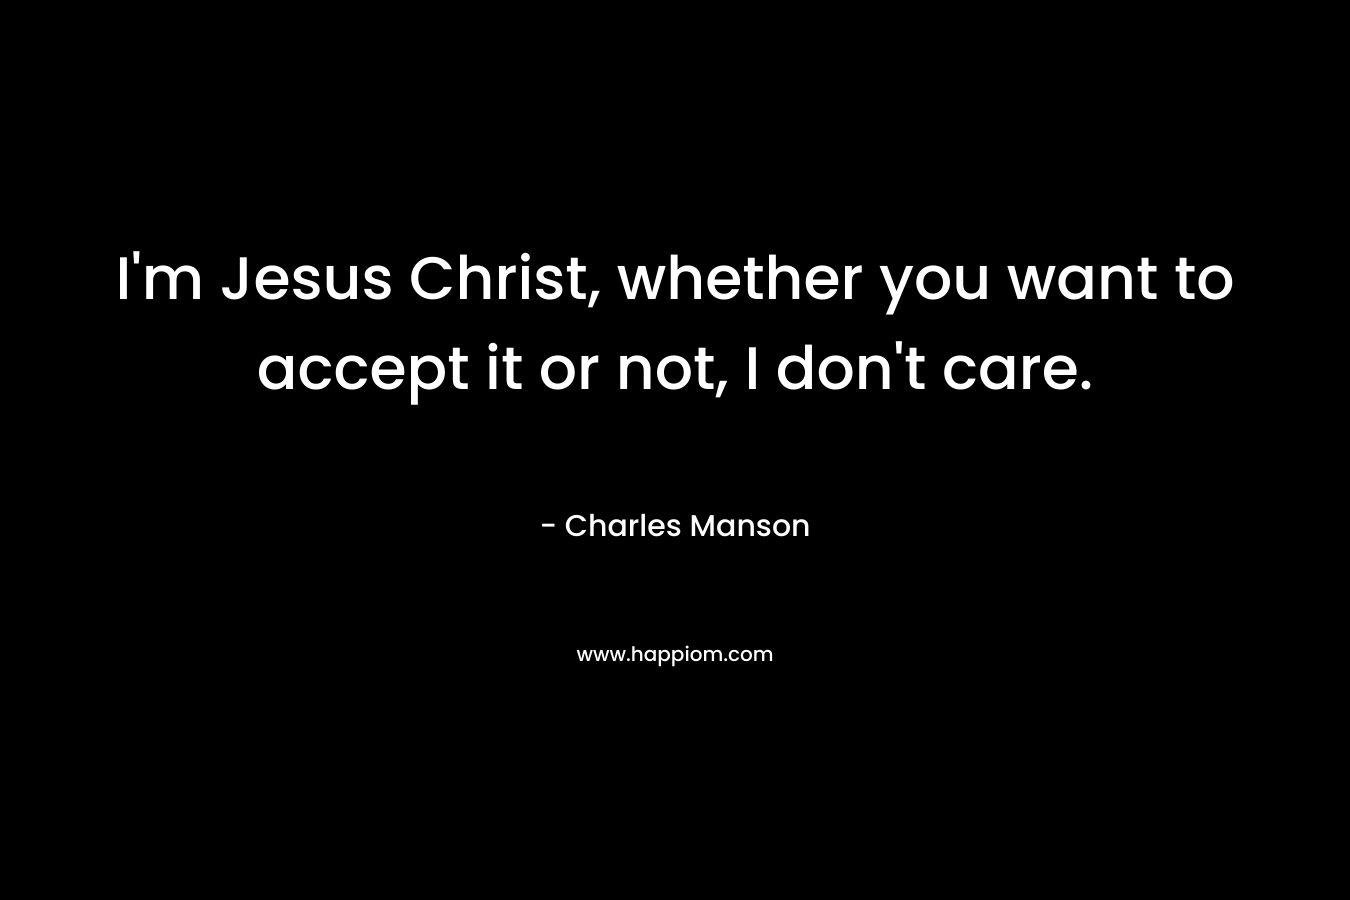 I'm Jesus Christ, whether you want to accept it or not, I don't care.